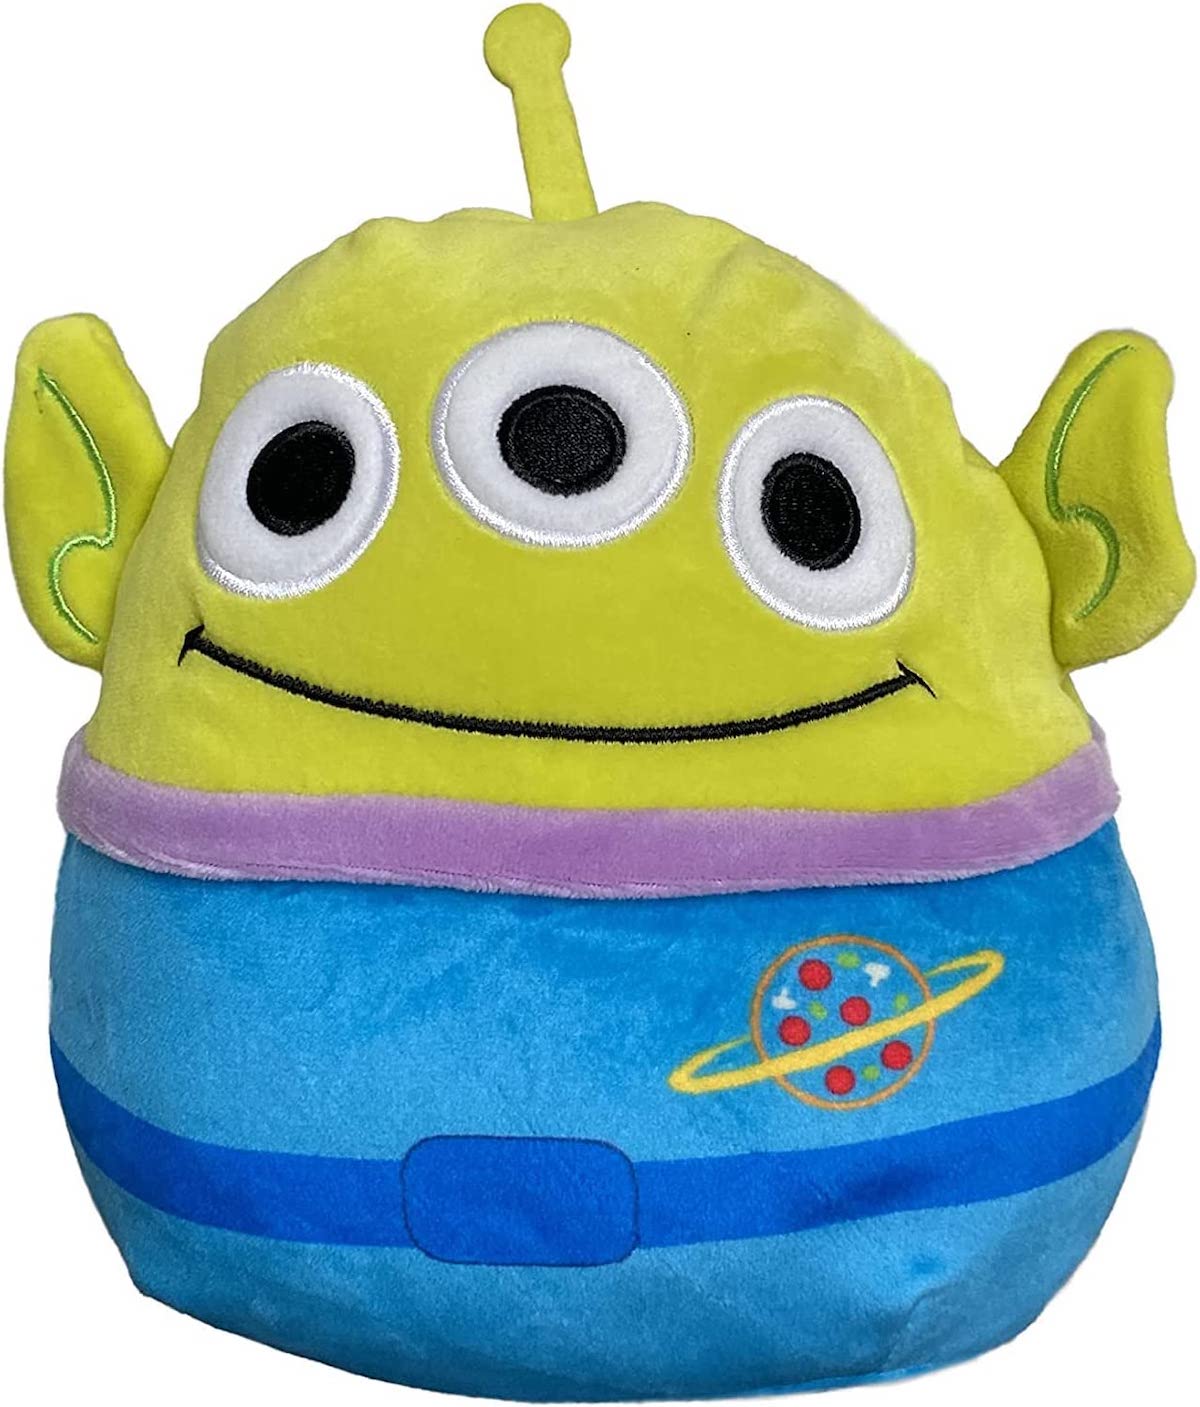 A green alien Squishmallow, with three eyes, an antenna and a blue space suit.